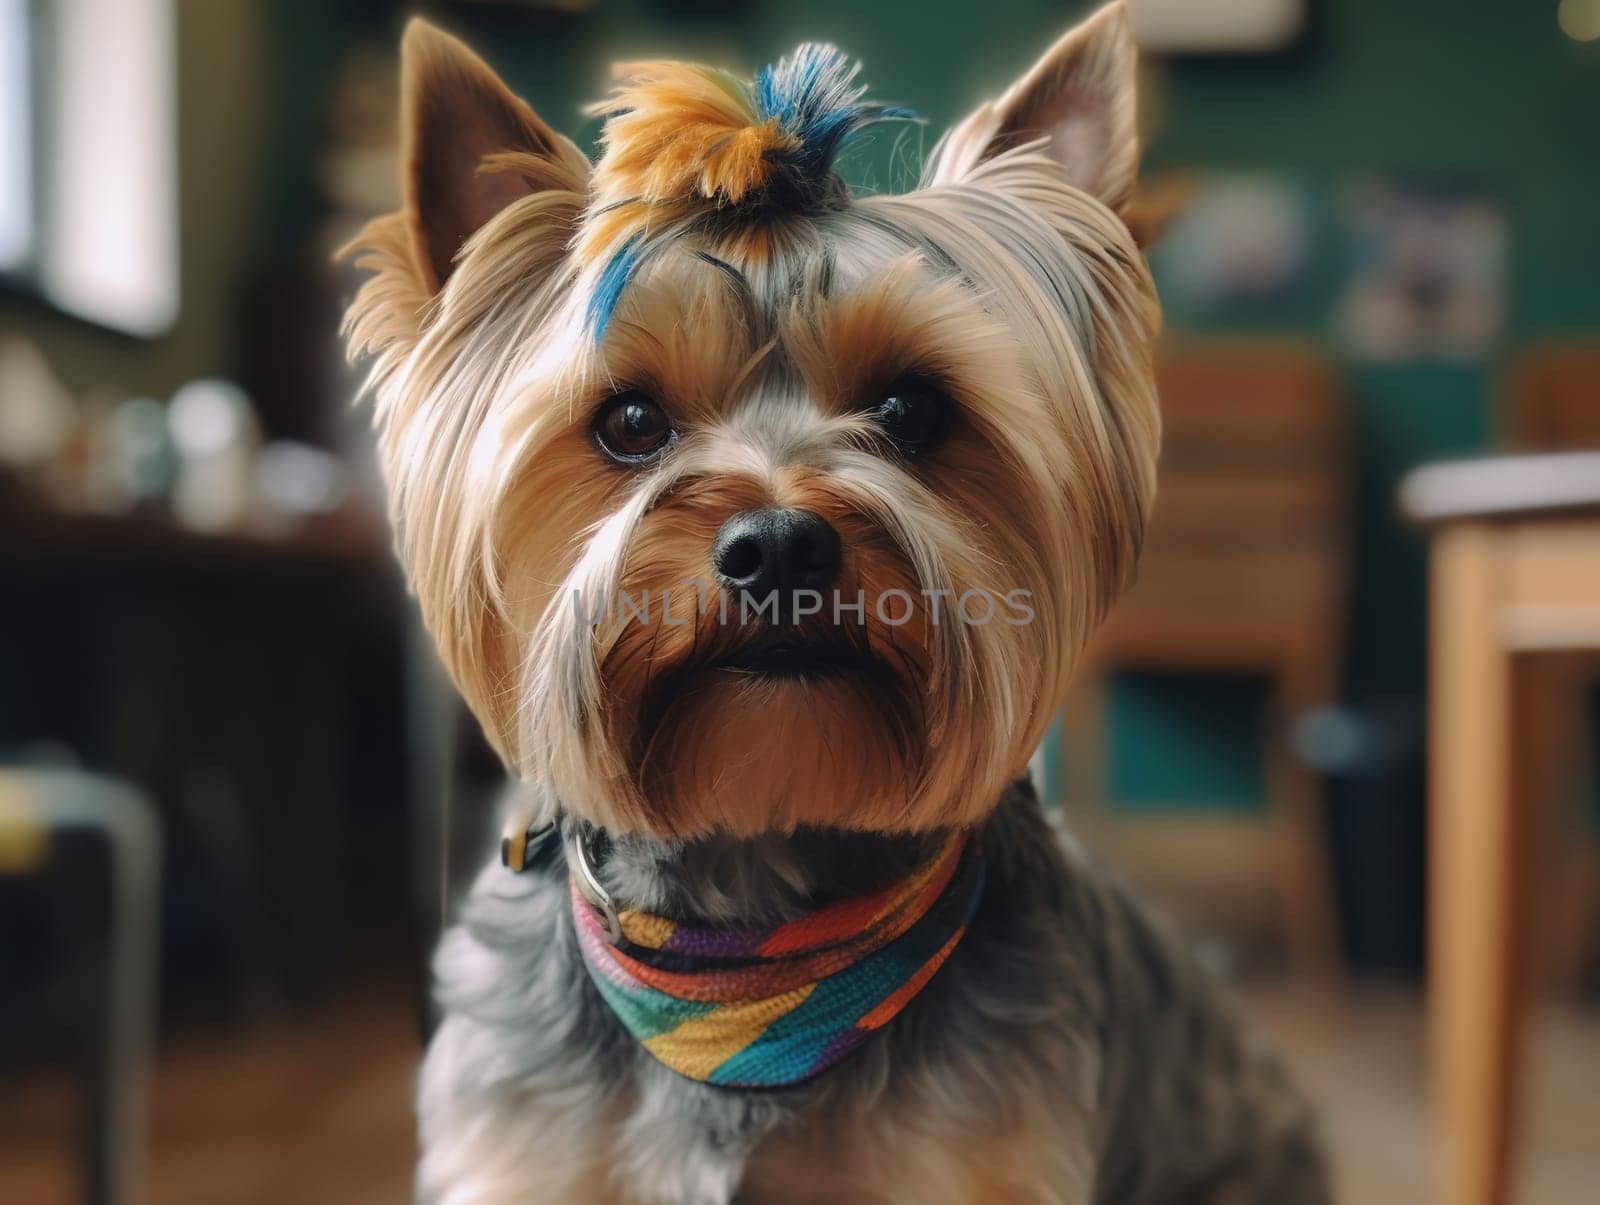 Cute Yorkshire Terrier With Colored Hair And Bandage by tan4ikk1